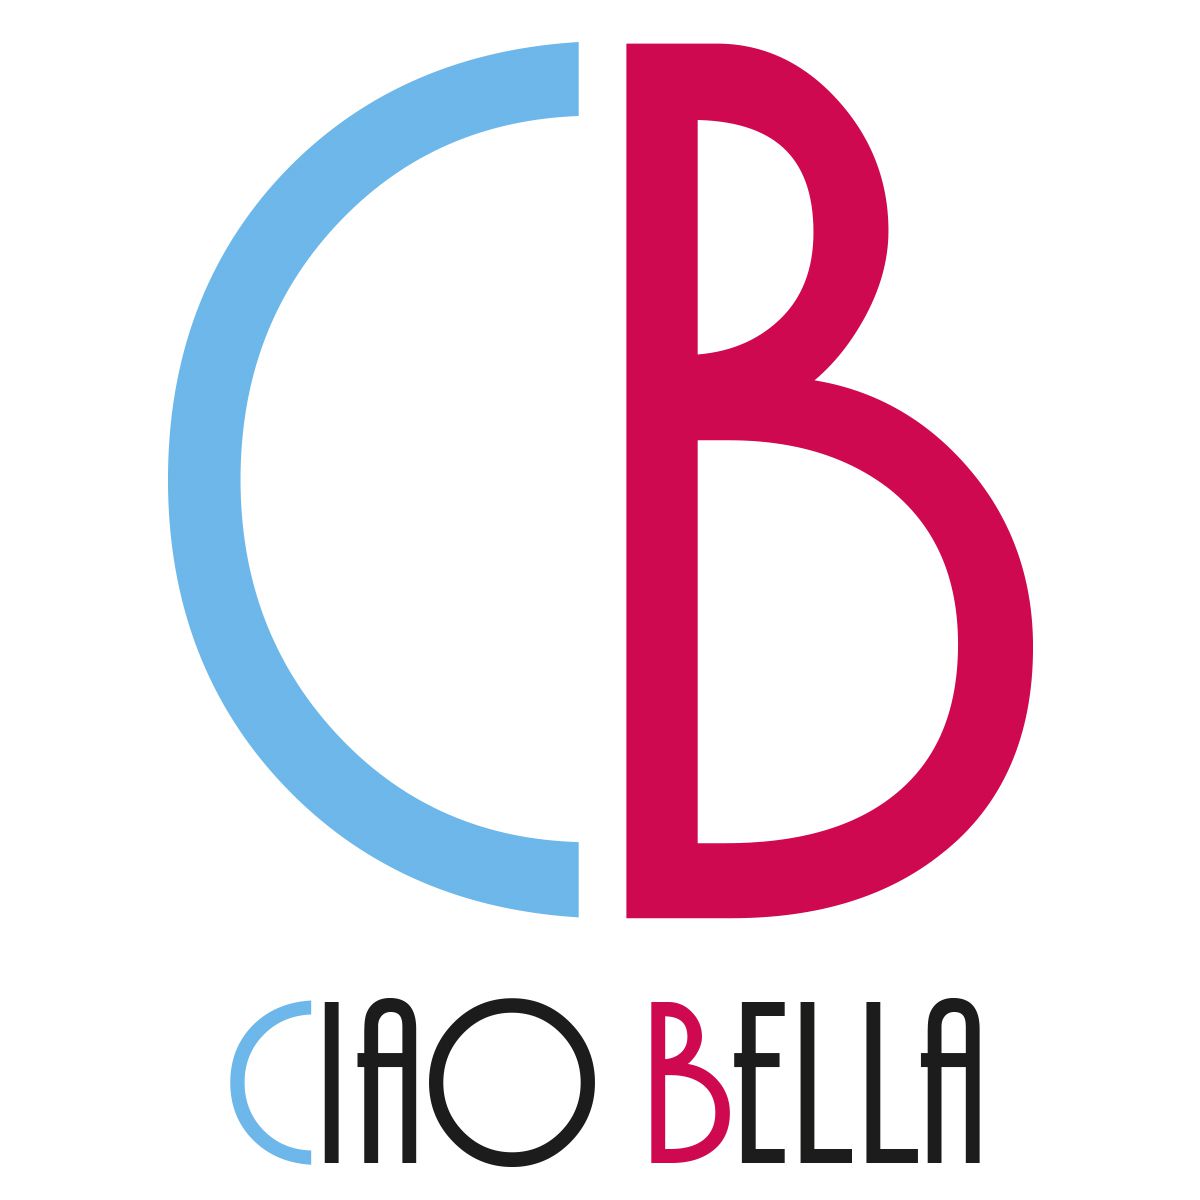 Ciao Bella Papercrafting